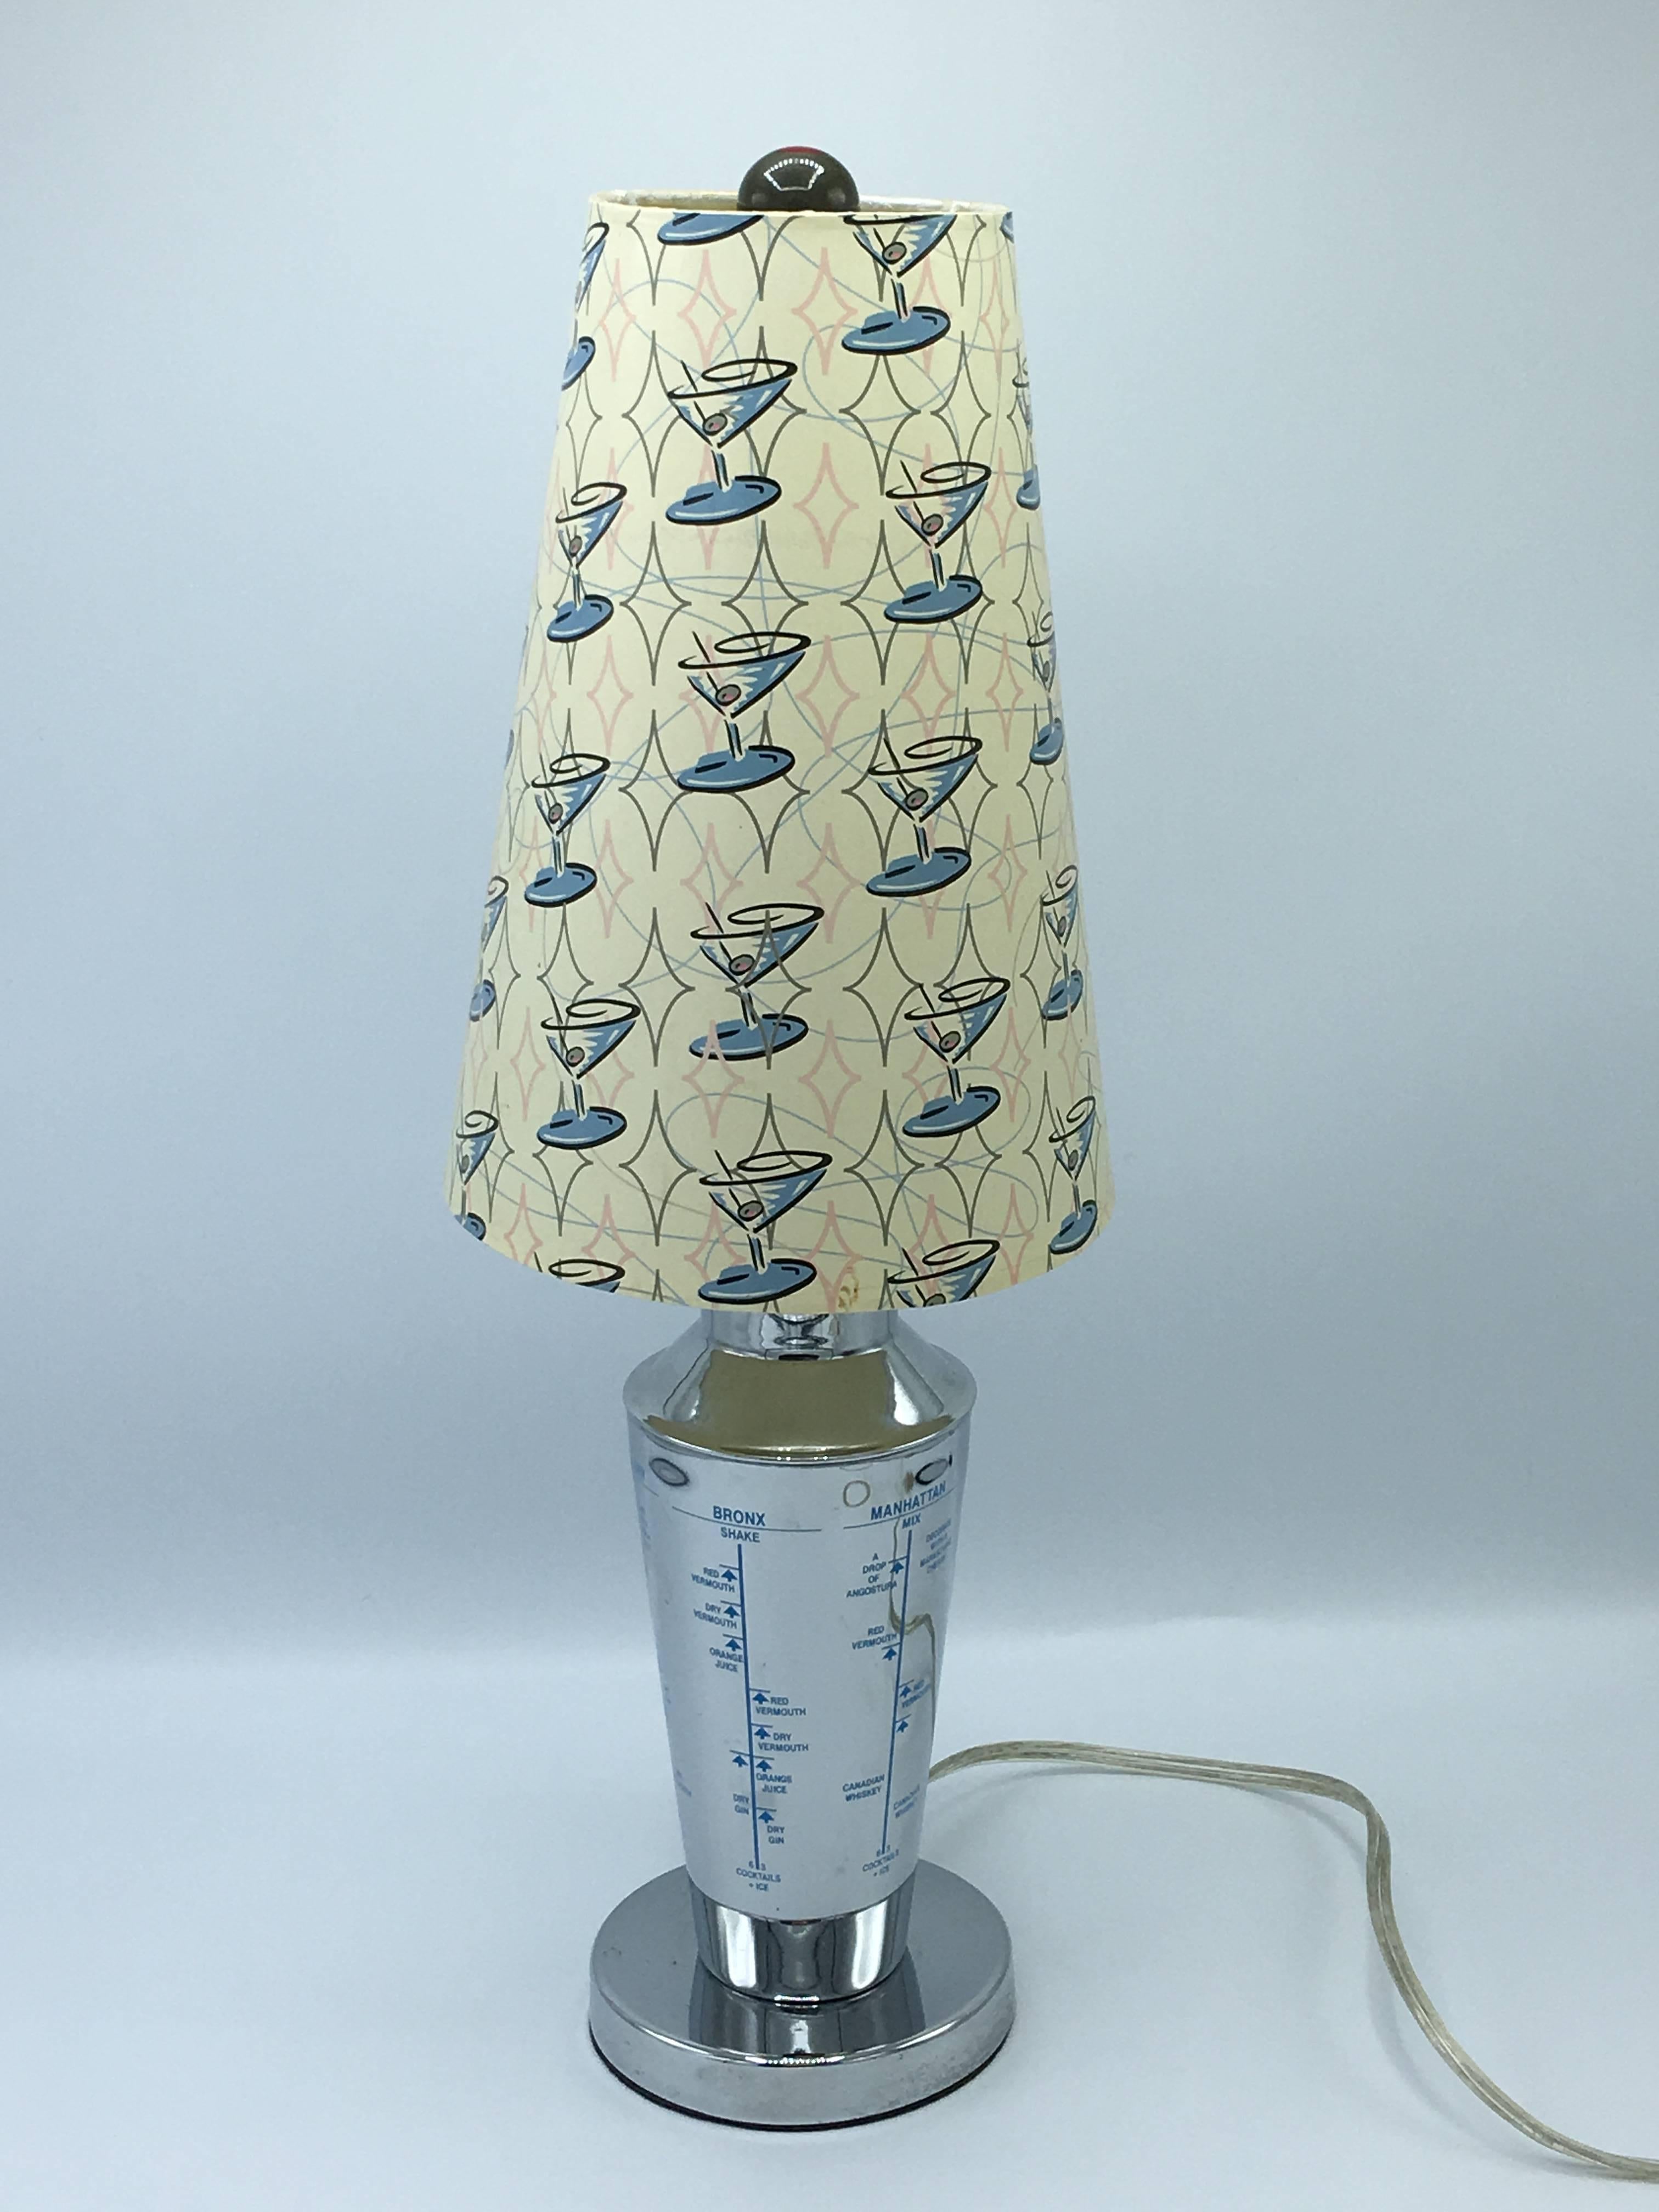 Offered is a fabulous and quirky, 1960s chrome martini Shaker lamp with a coordinating shade and finial. The shade has a retro martini print on it, with a matching olive finial. Rewired.